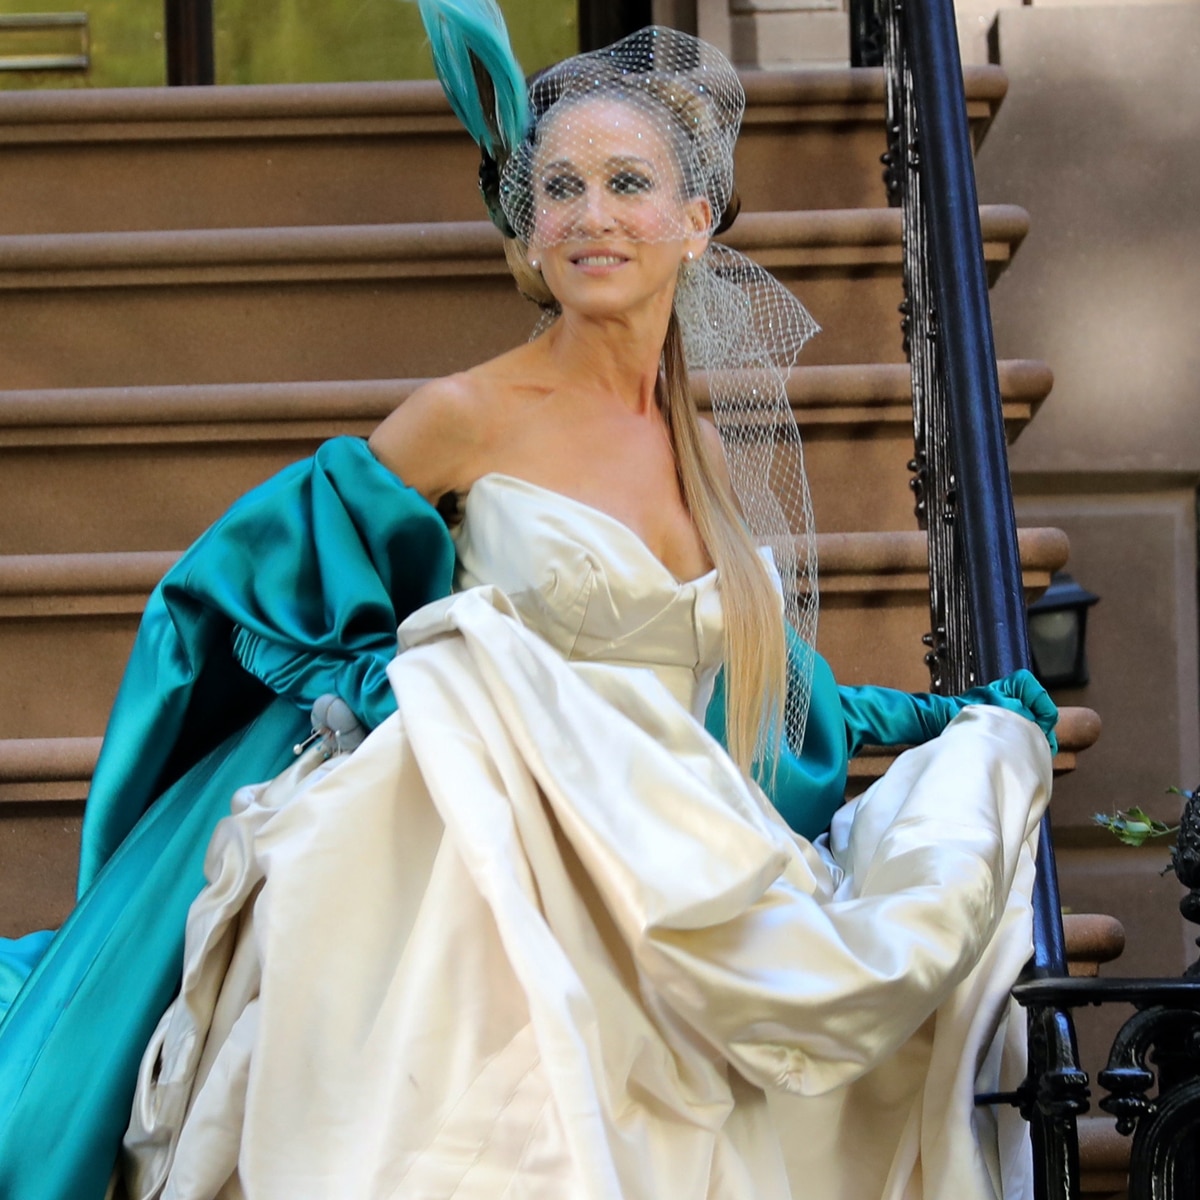 Confirmed: Carrie Bradshaw Has a Thing for Birds